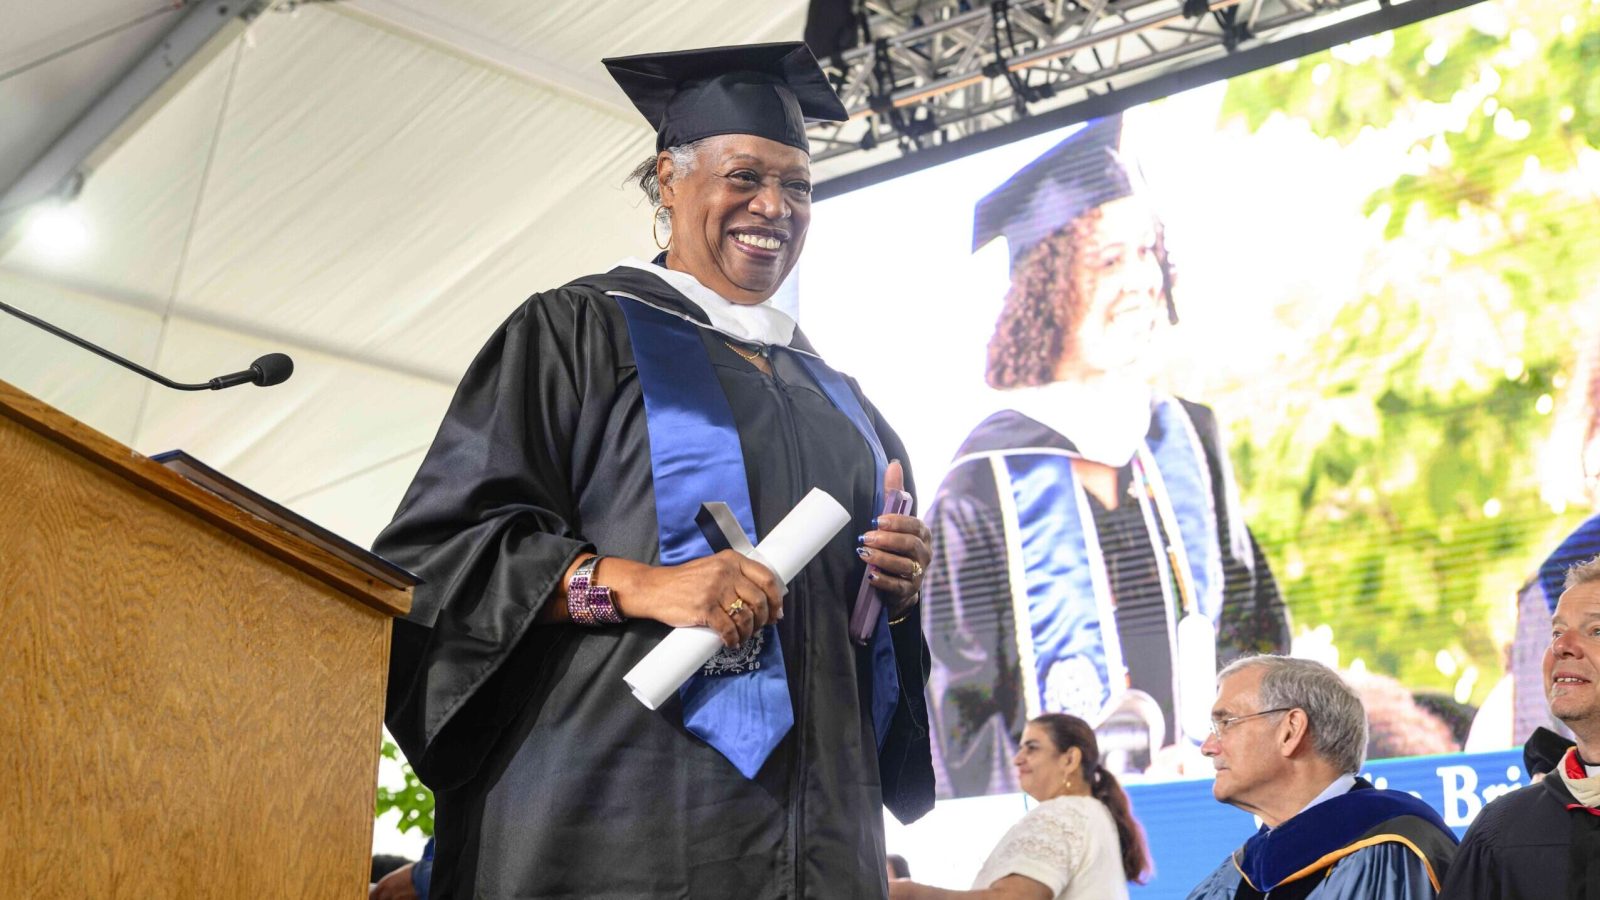 Karen Franklin walks across the stage with her degree in hand. She wears a cap and gown and smiles at the camera.